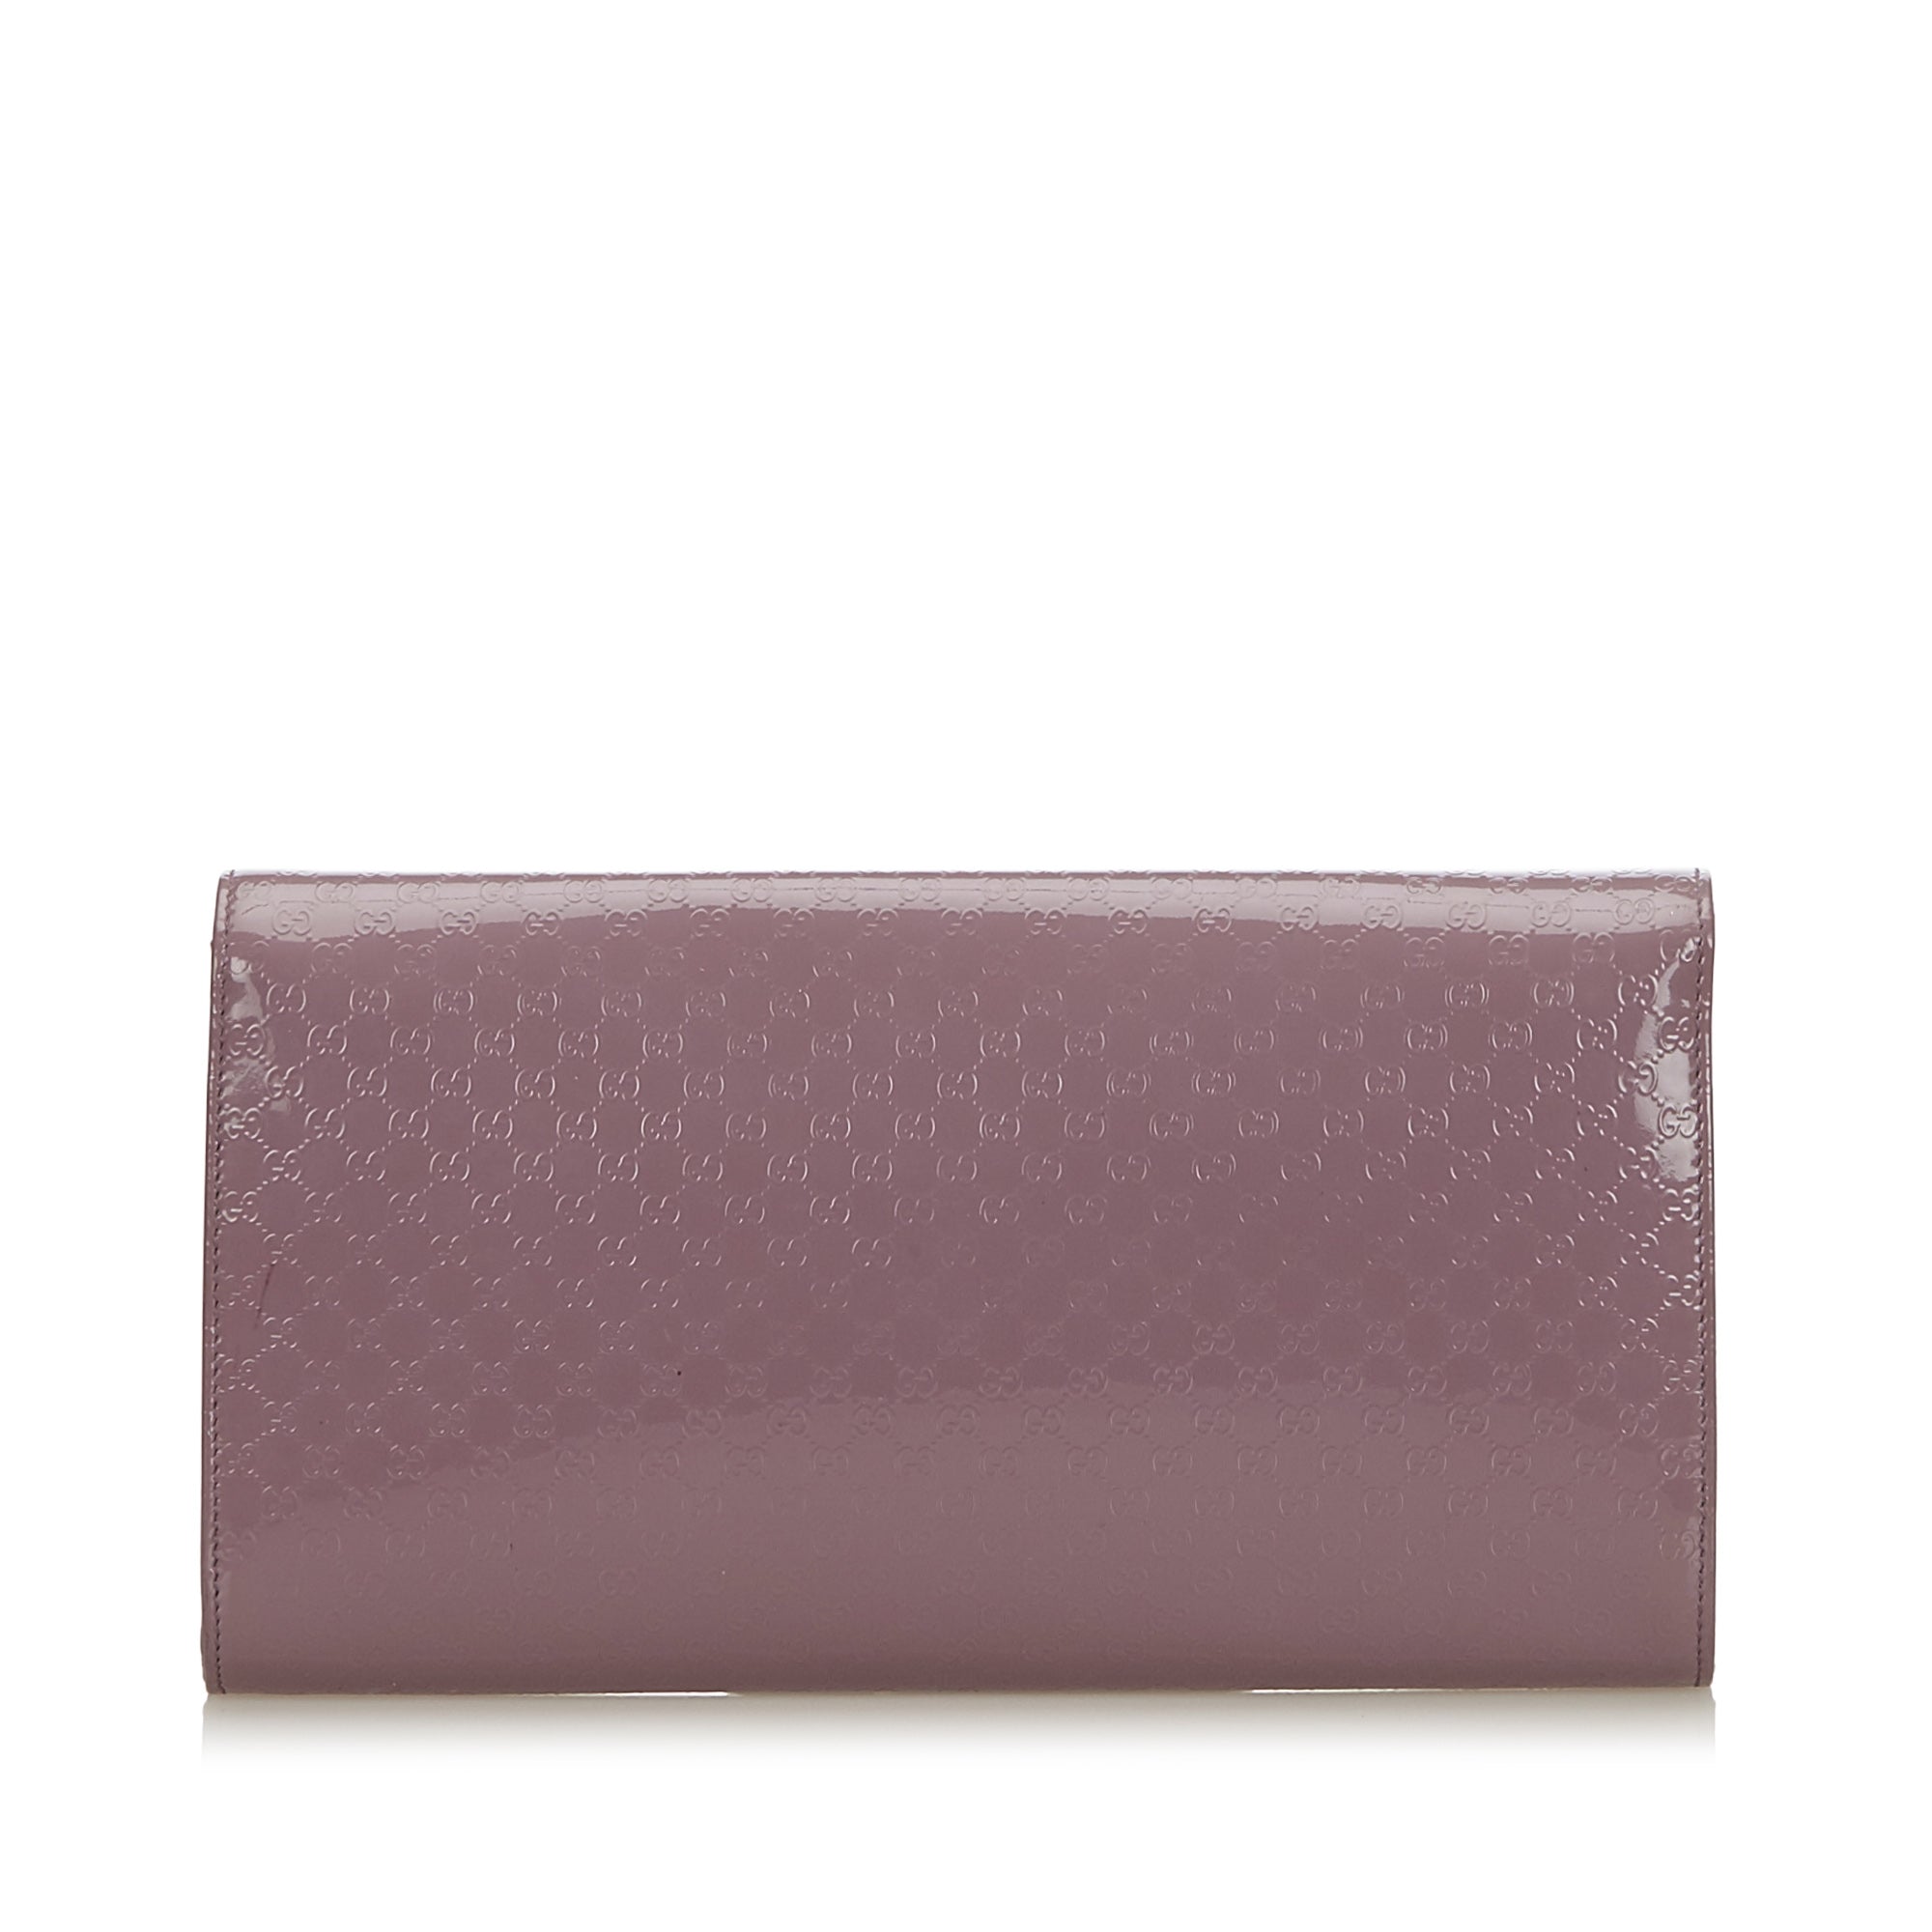 Buy & Consign Authentic Gucci Microguccissima Broadway Clutch at The Plush Posh